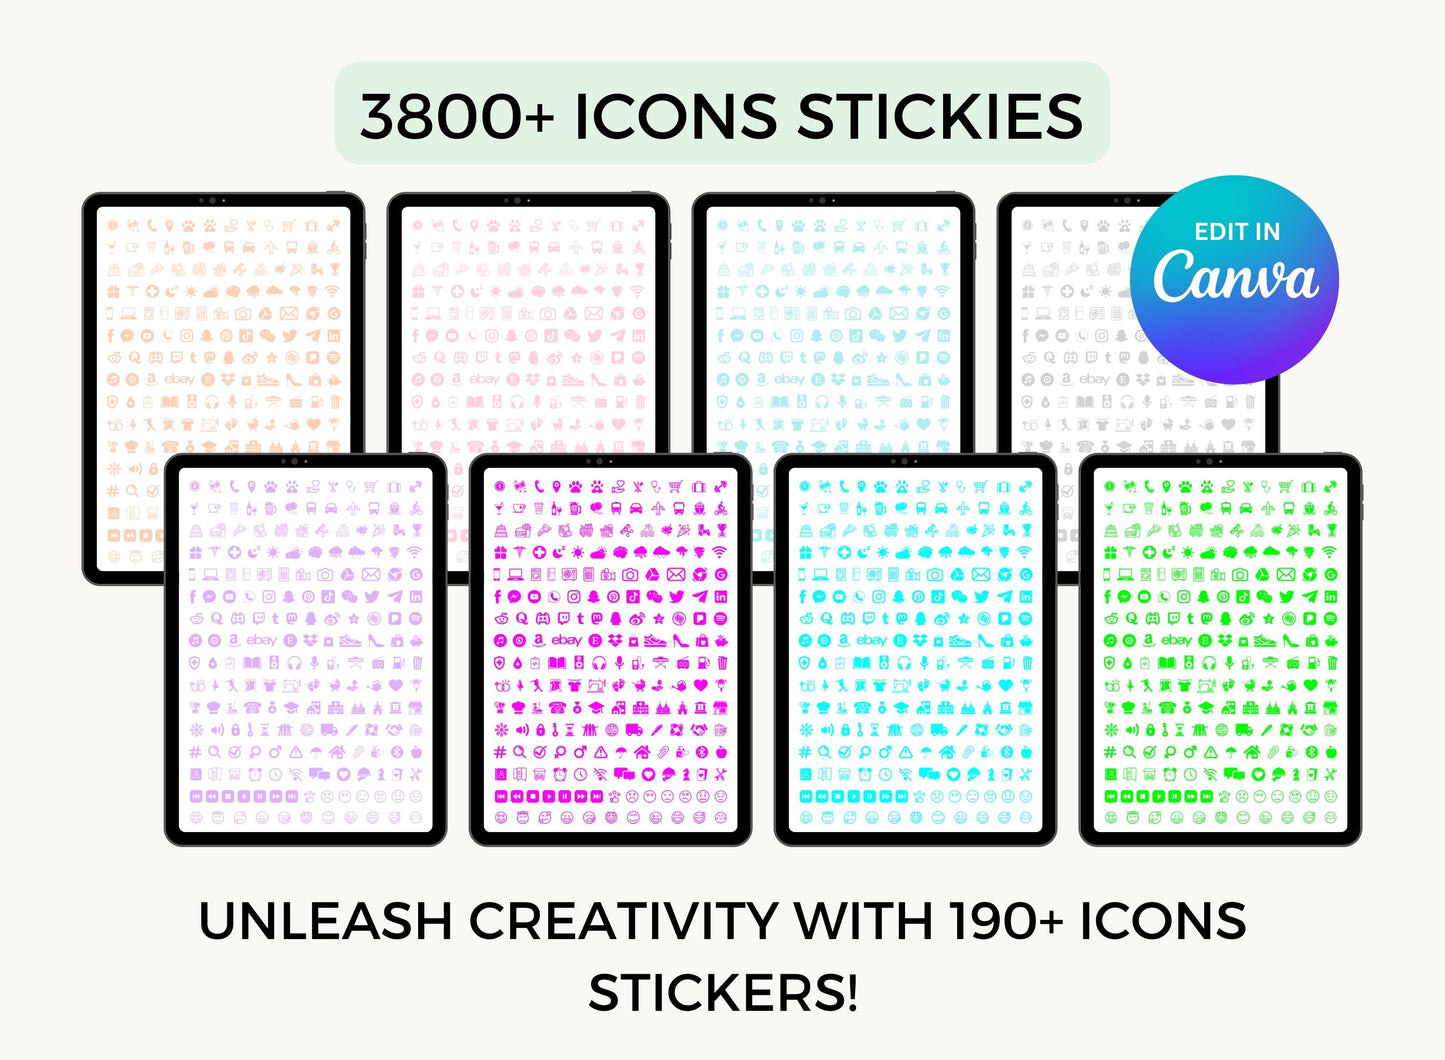 Exclusive Sticker Graphics, Editable Stickers, Editable Sticker Bundle, Downloadable Sticker Pack, DIY Crafts, DIY Crafting Assets, Digital Stickers, Digital Scrapbooking Elements, Digital Planner Stickers, Digital Crafting Supplies, Customizable Sticker Collection, Customizable Designs